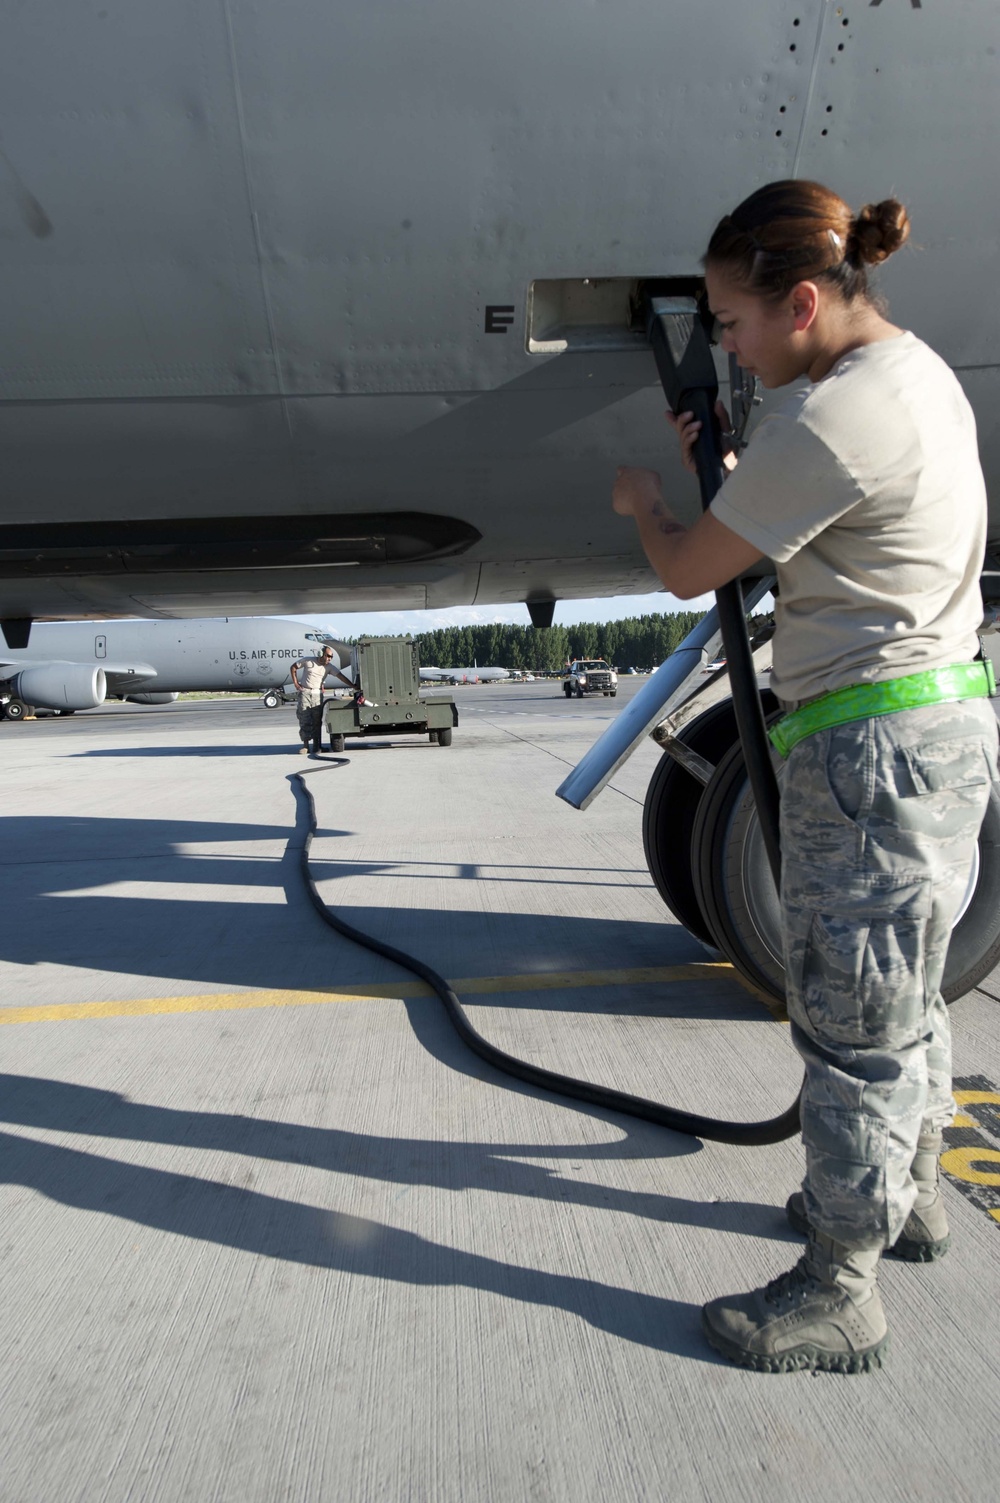 376 EAMXS keep air refuelers flying